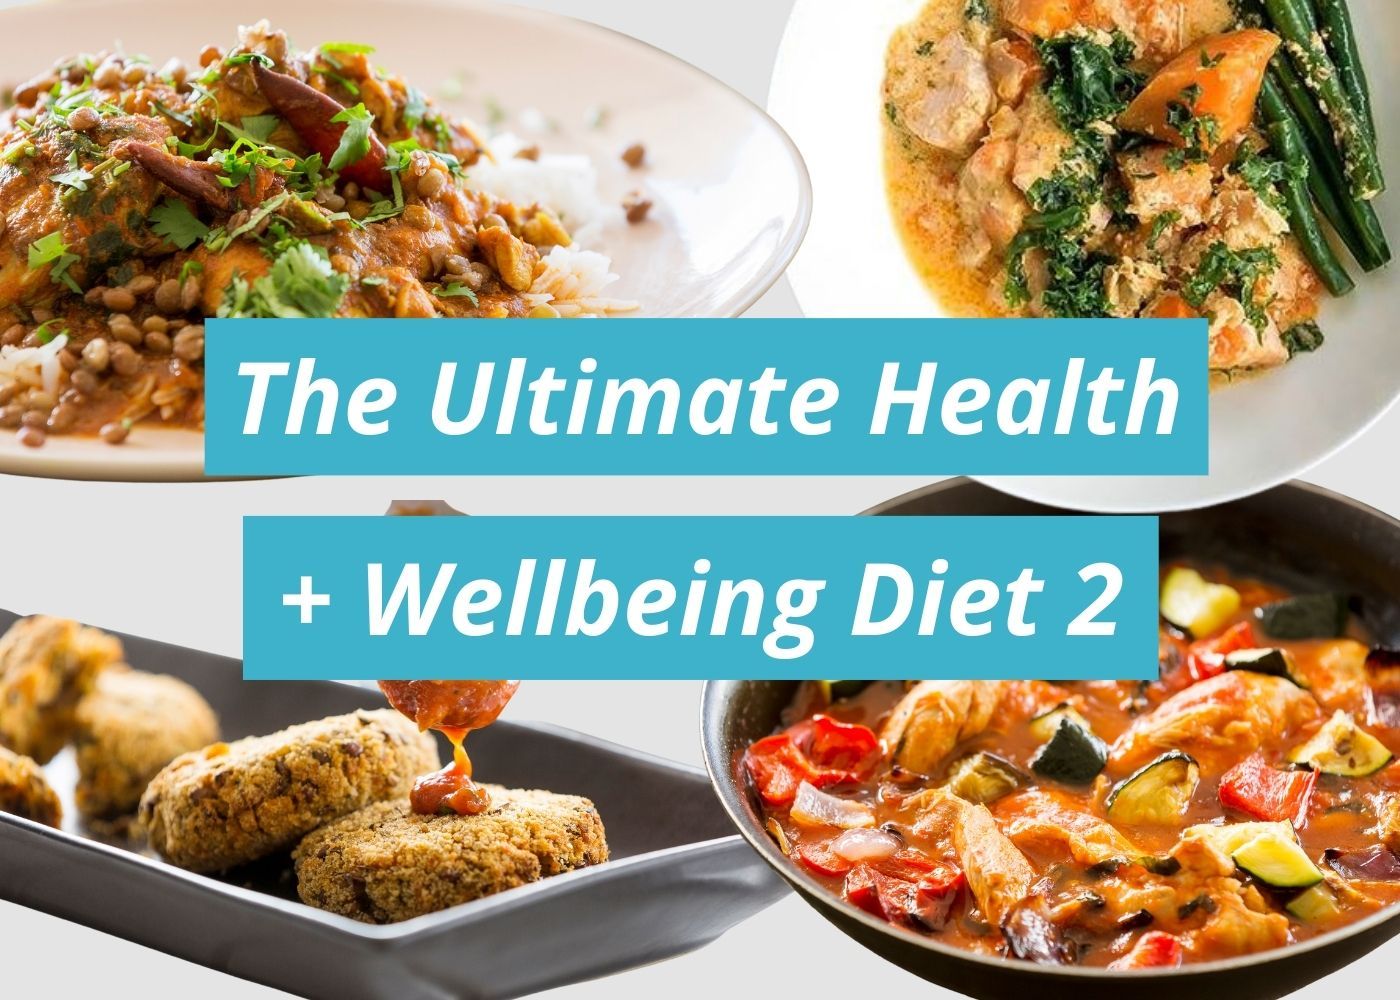 The Ultimate Health + Wellbeing Diet 2